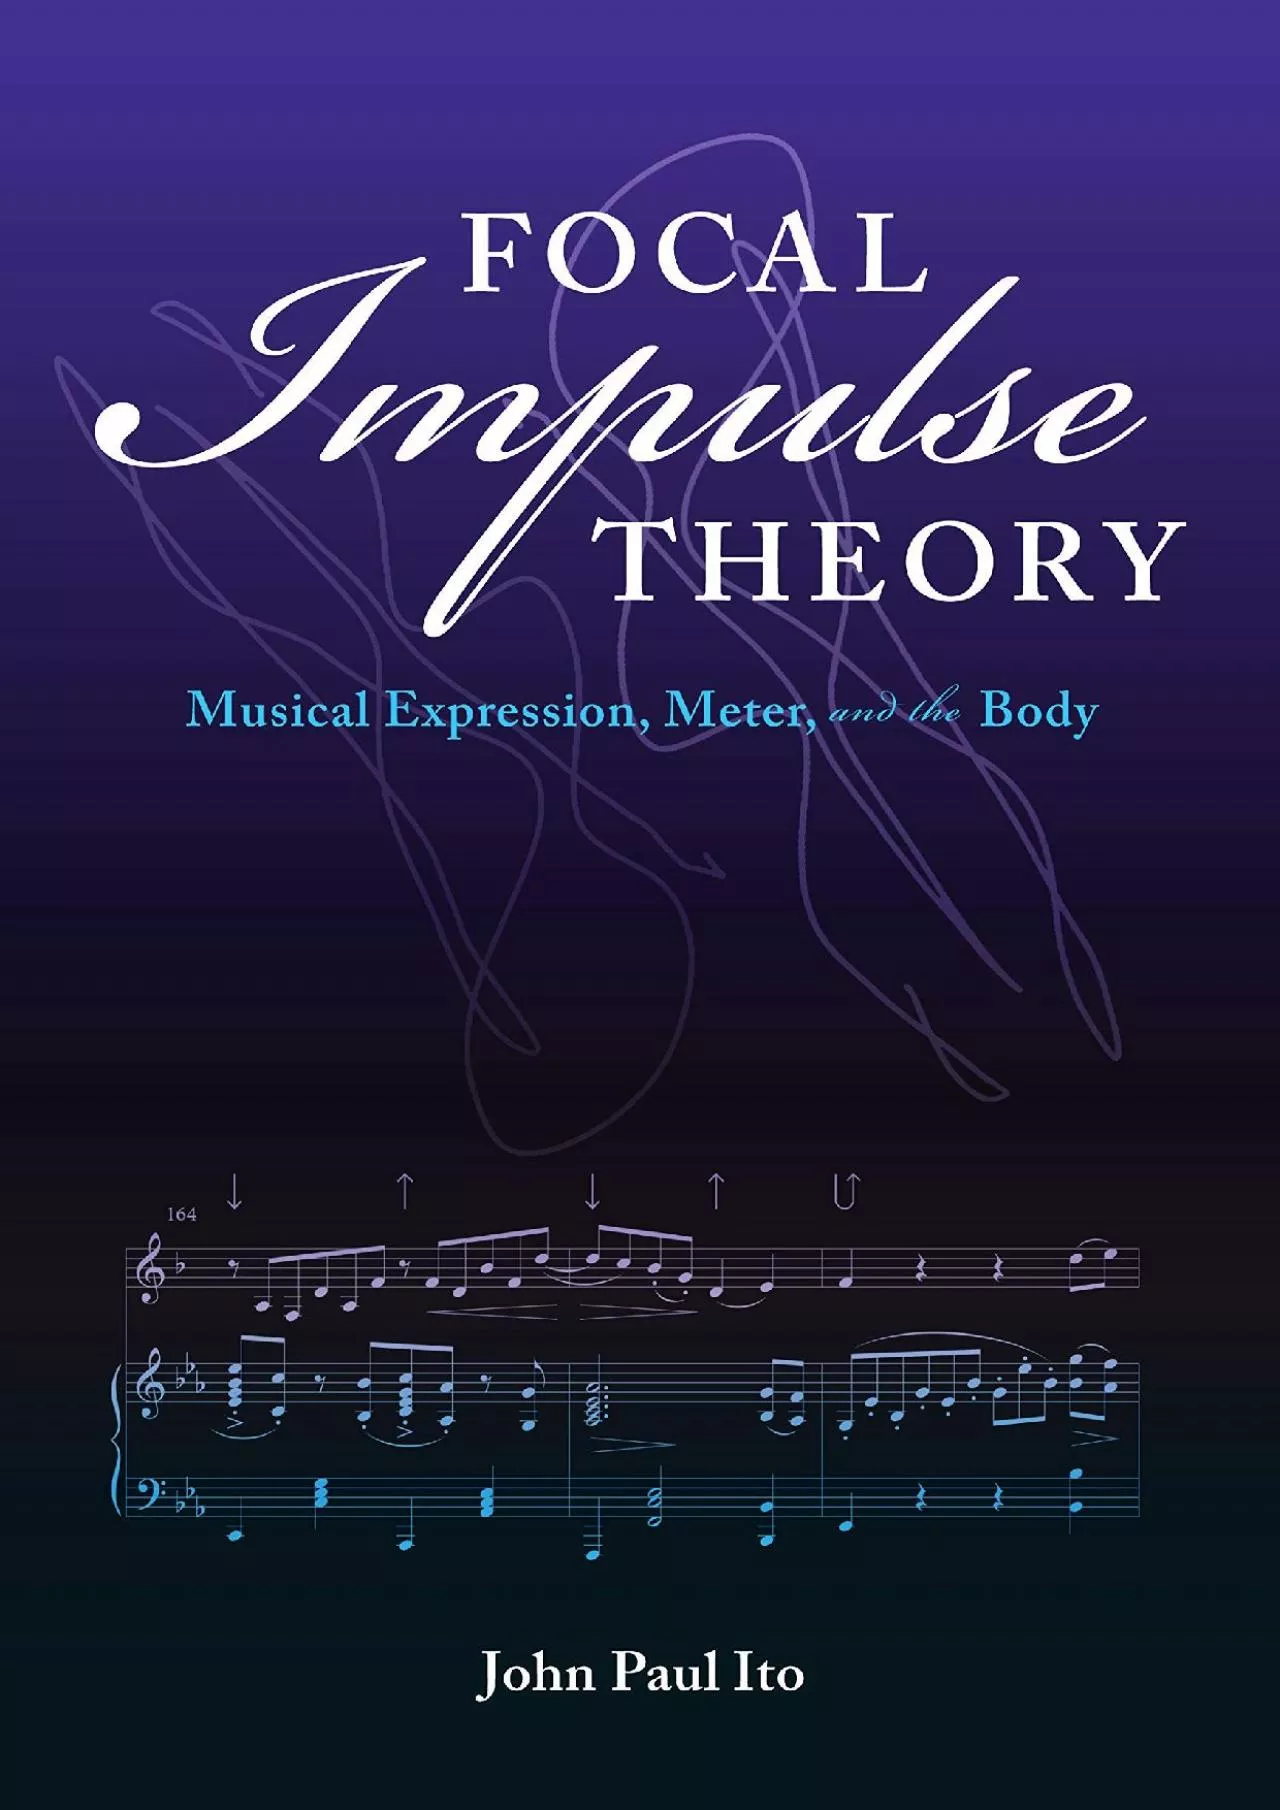 (BOOK)-Focal Impulse Theory: Musical Expression, Meter, and the Body (Musical Meaning